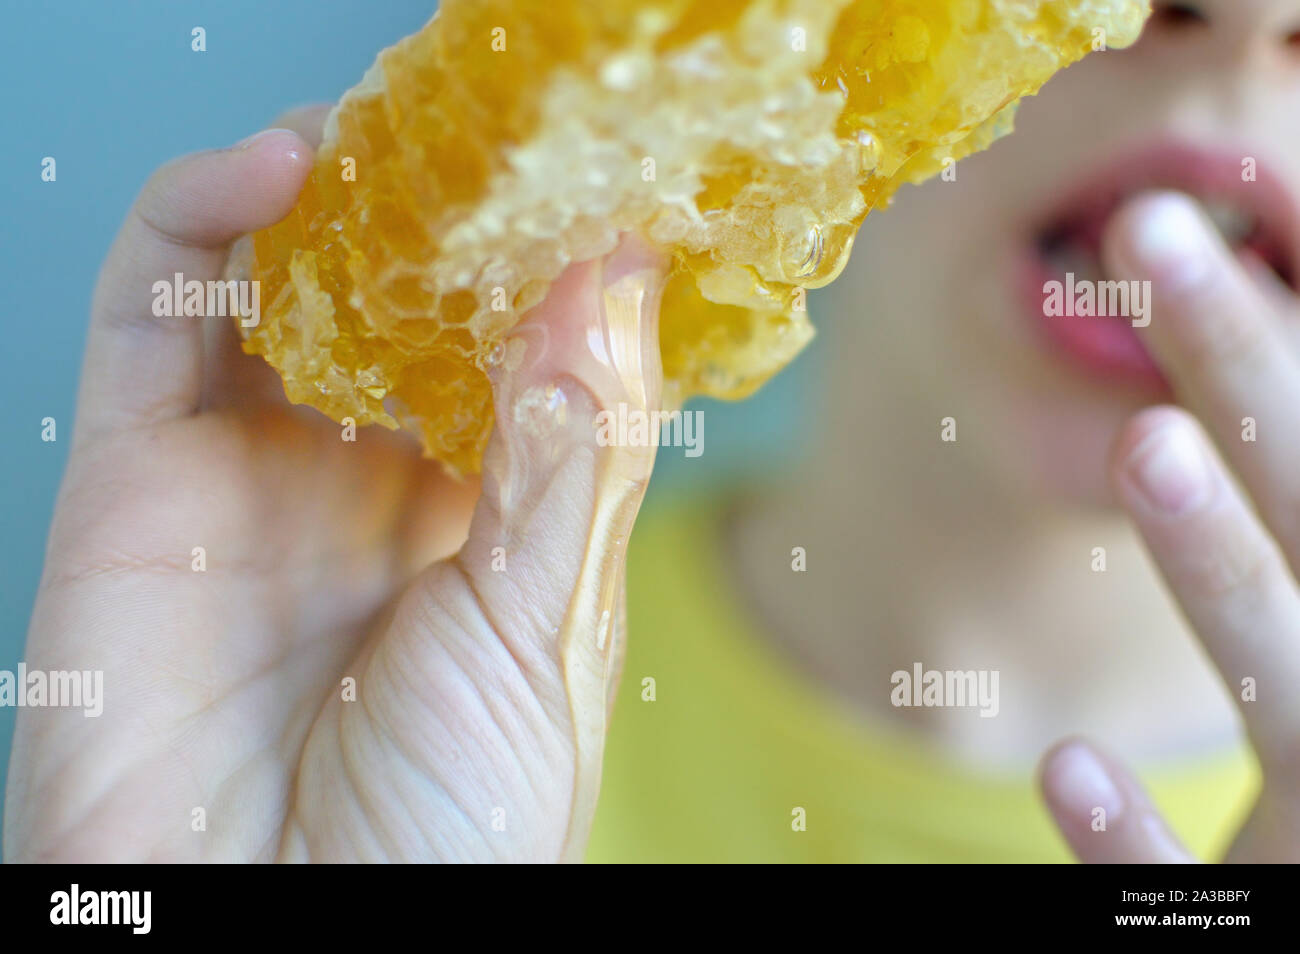 Close up shot of honeycomb and honey dripping with blurry girl in background Stock Photo